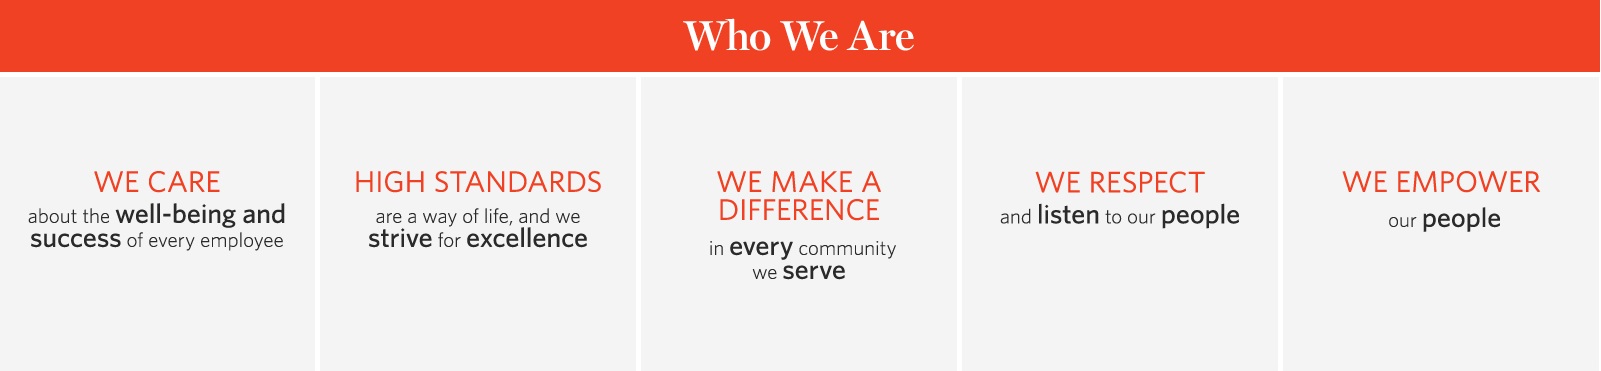 Info graphic: Who We Are. We care about the well-being and success of every employee. High standards are a way of life, and we strive for excellence. We make a difference in every community we serve. We respect and listen to our people. We empower our people.